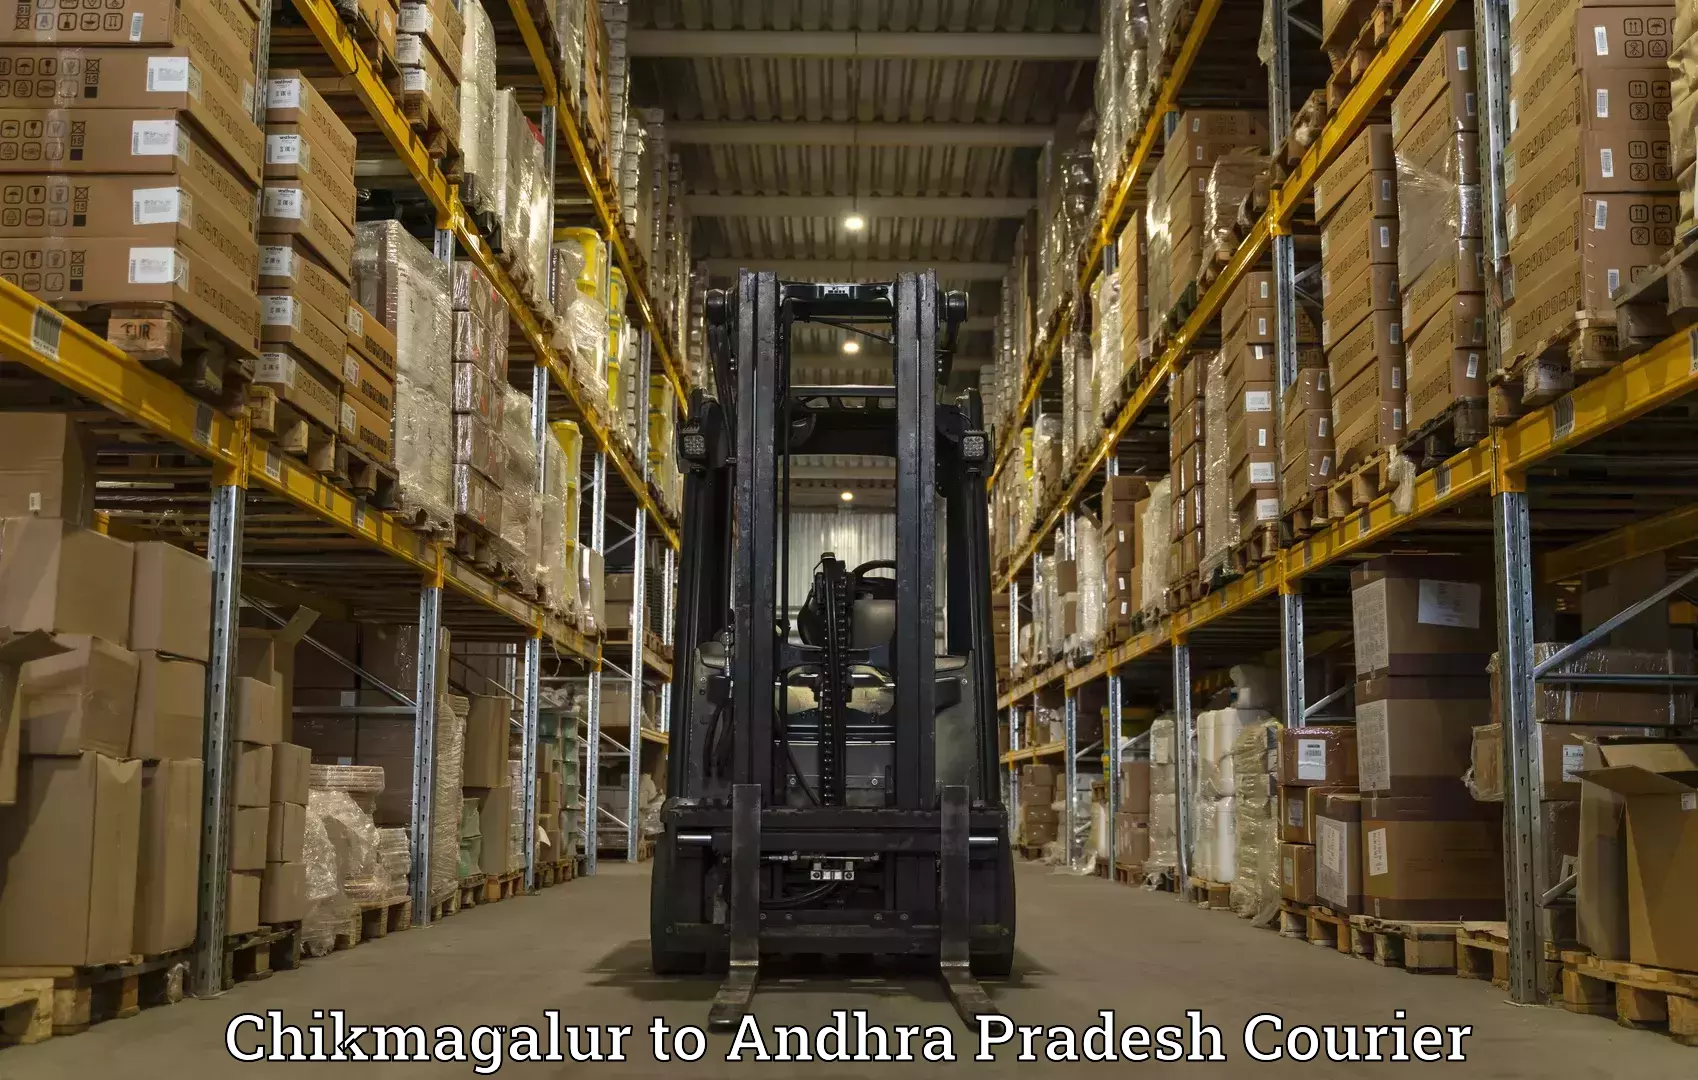 Advanced tracking systems Chikmagalur to Visakhapatnam Port